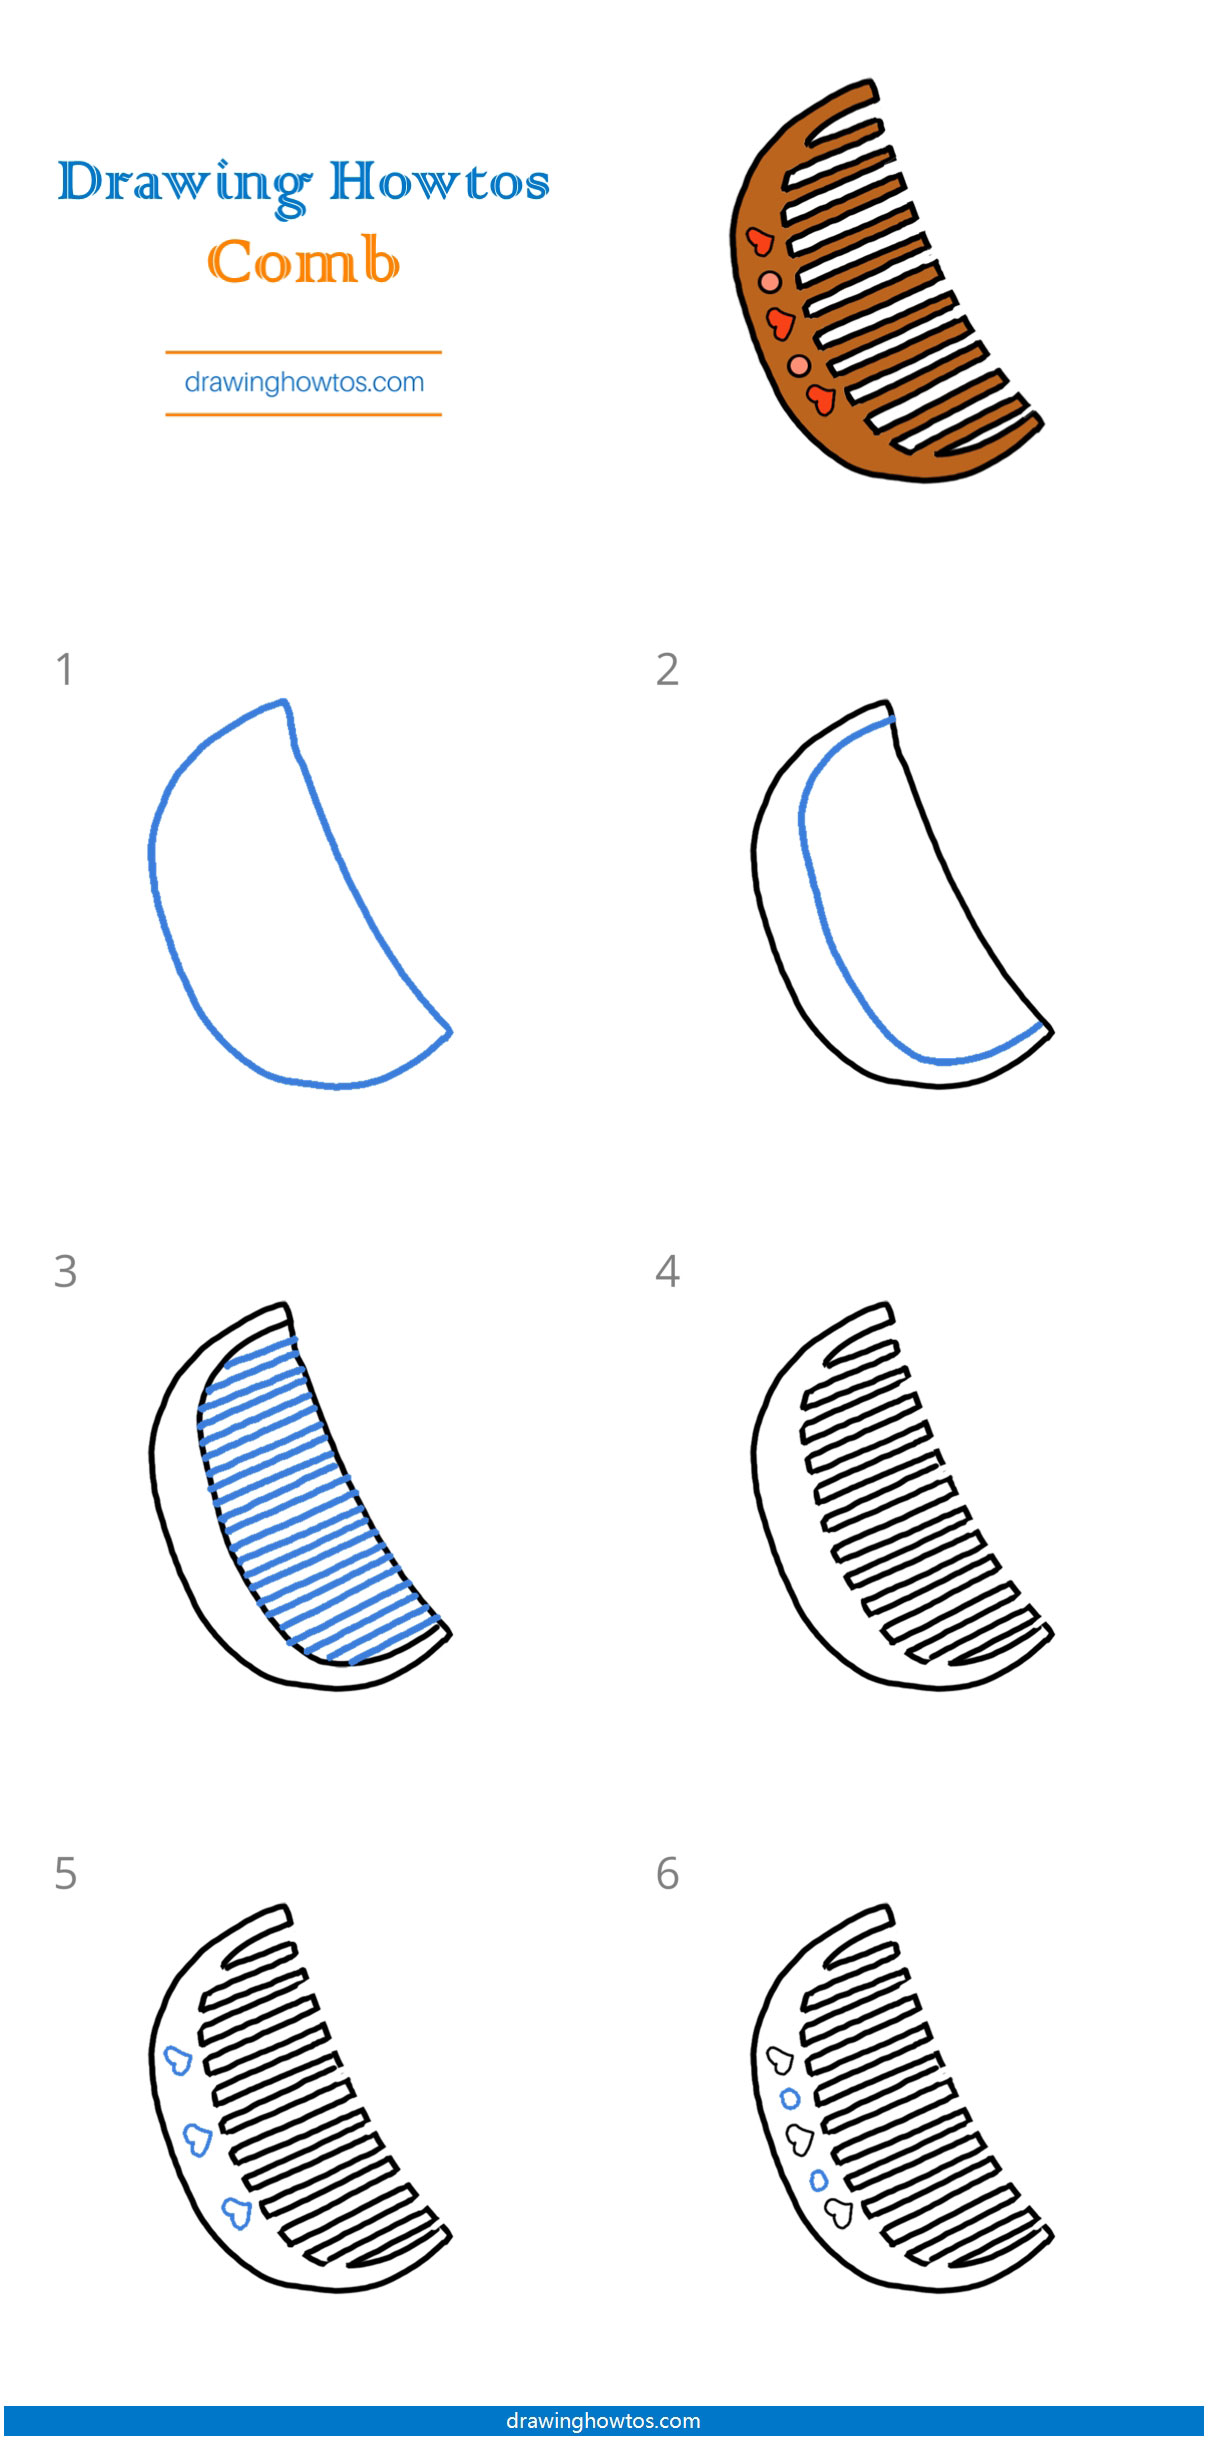 How to Draw a Wide-toothed Comb Step by Step